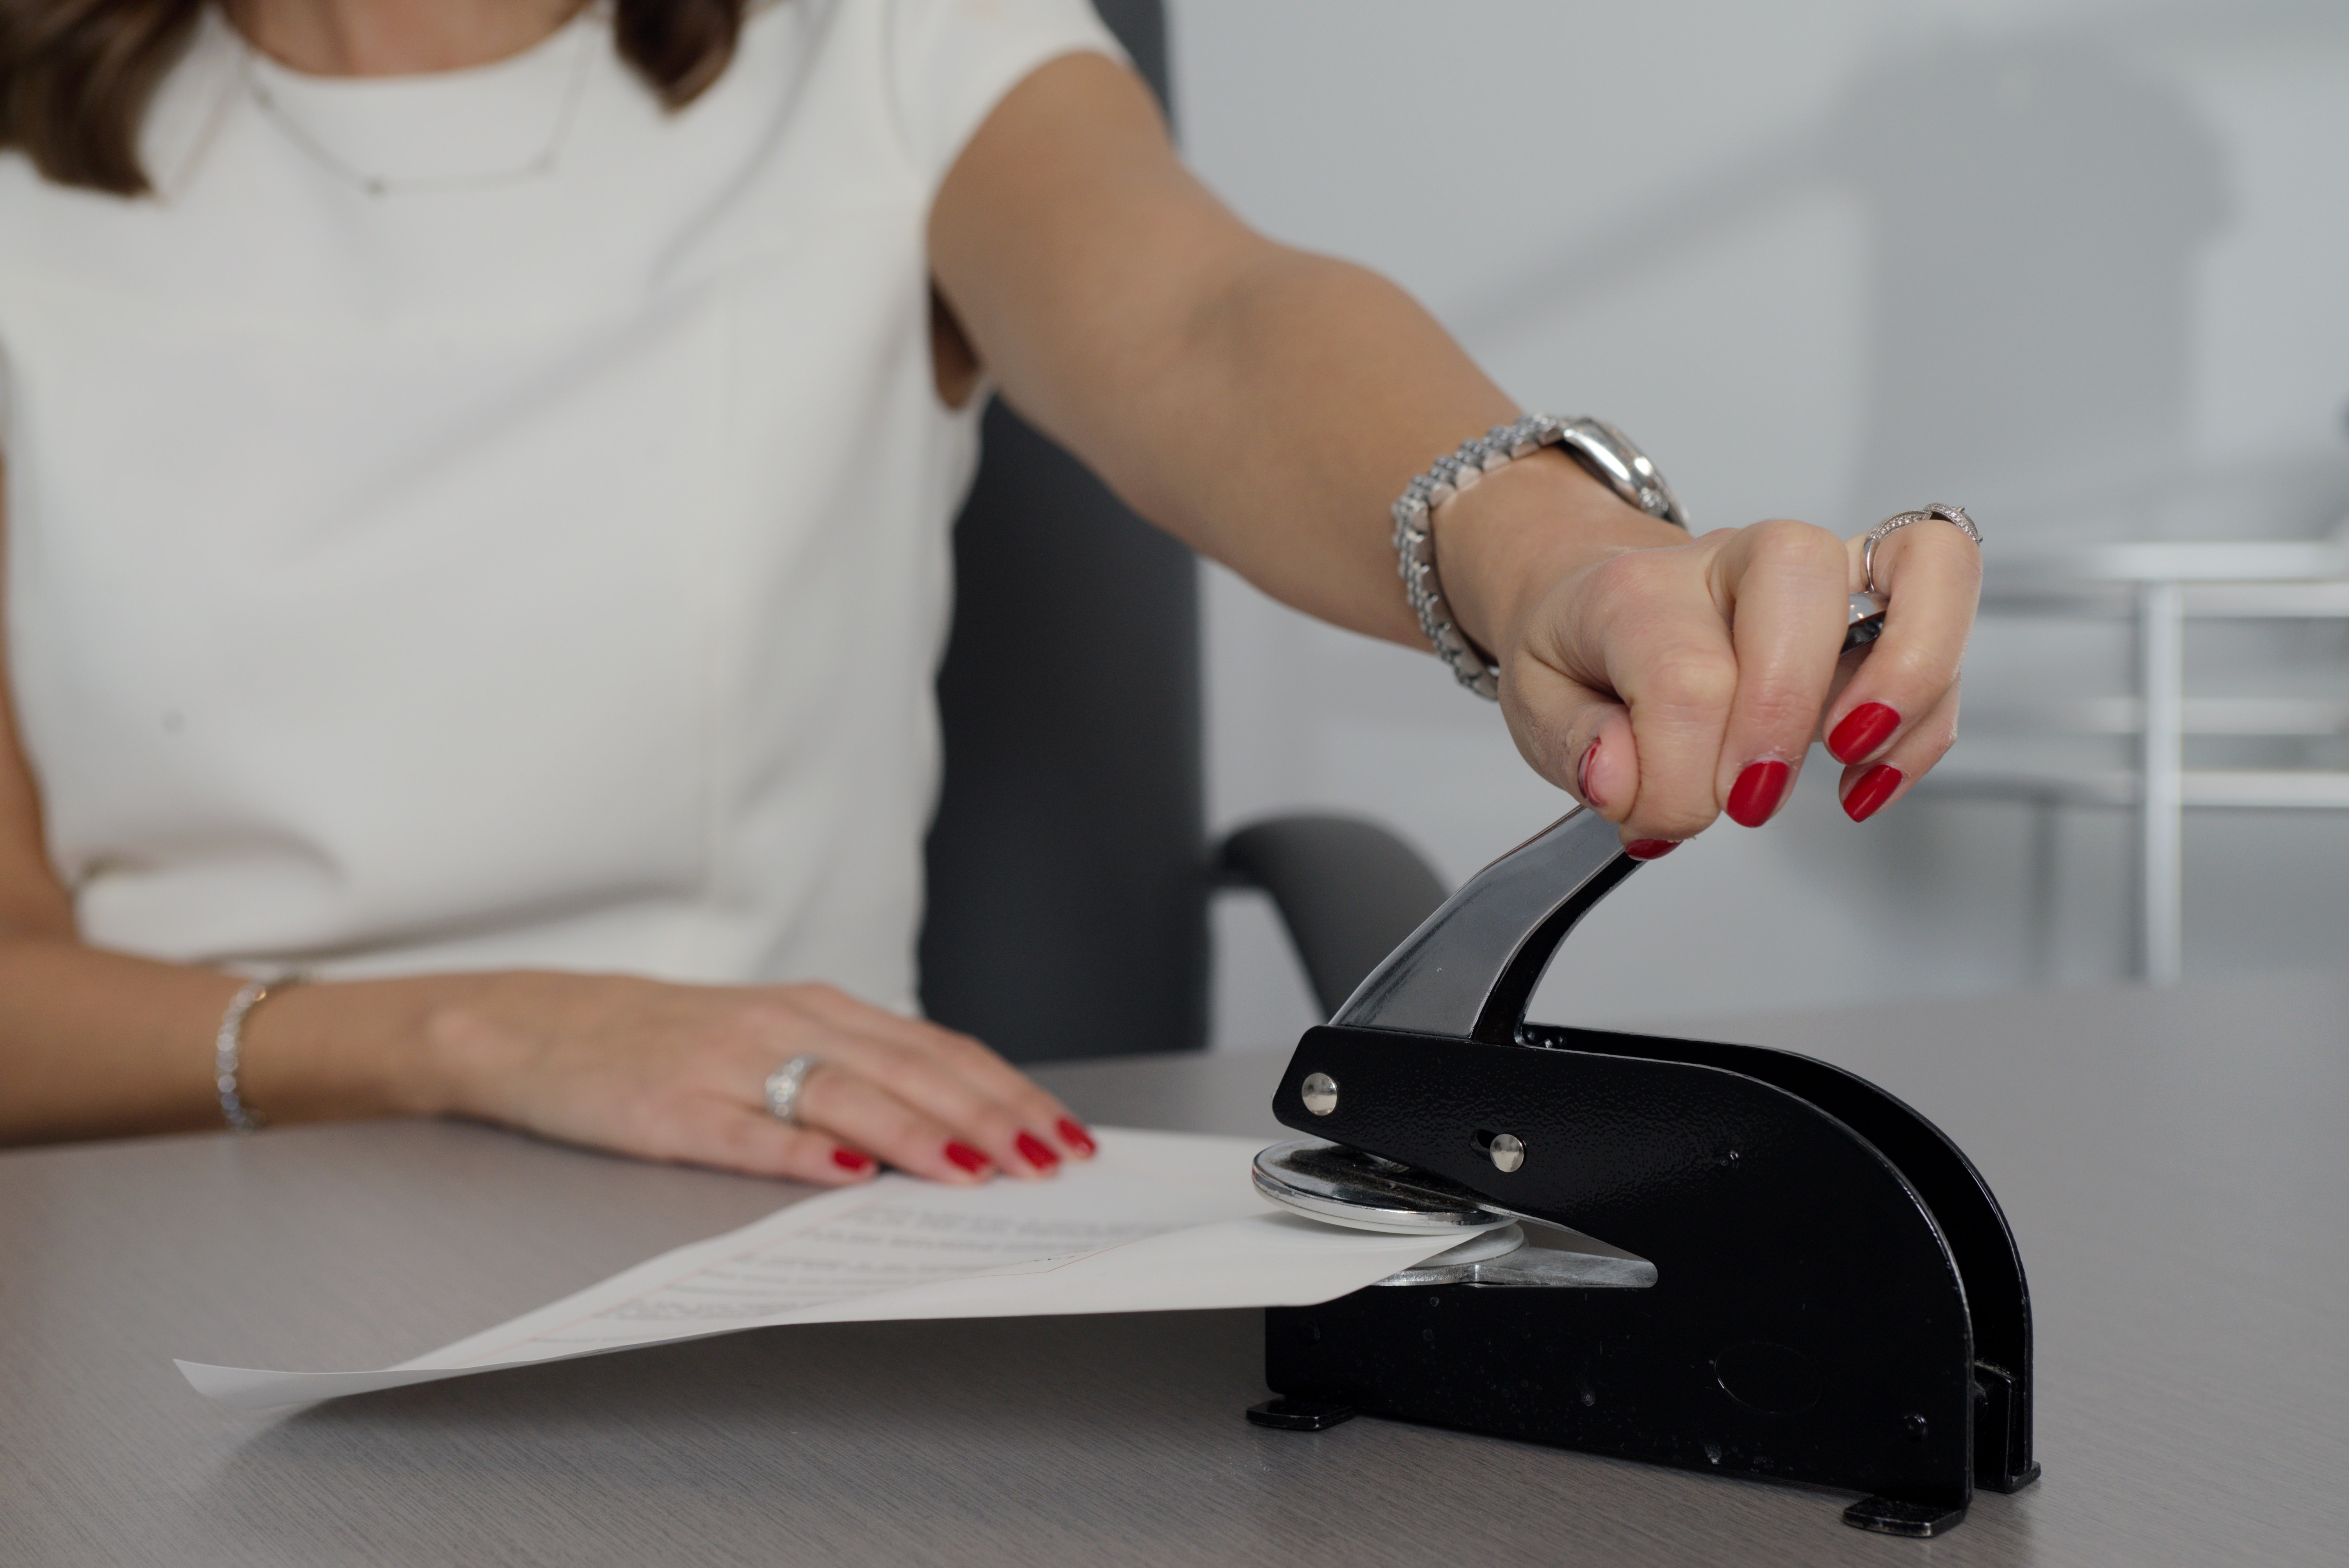 Notary putting a professional seal on a legal document; image by Stephen Goldberg, via Unsplash.com.